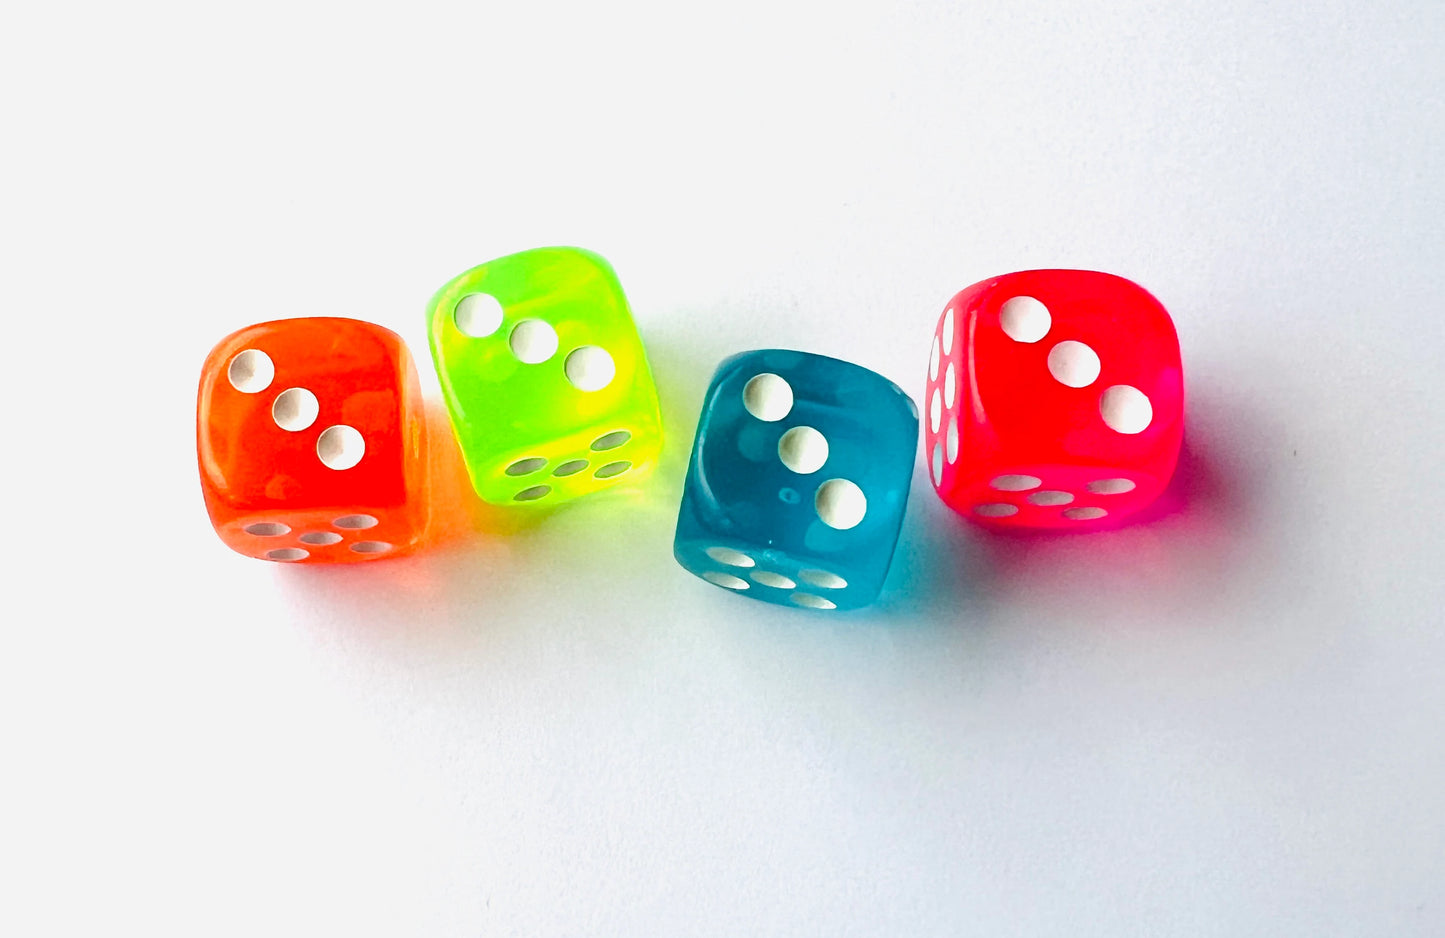 Colored Dice - 4 translucent "neon" colors - 4 pack or singles